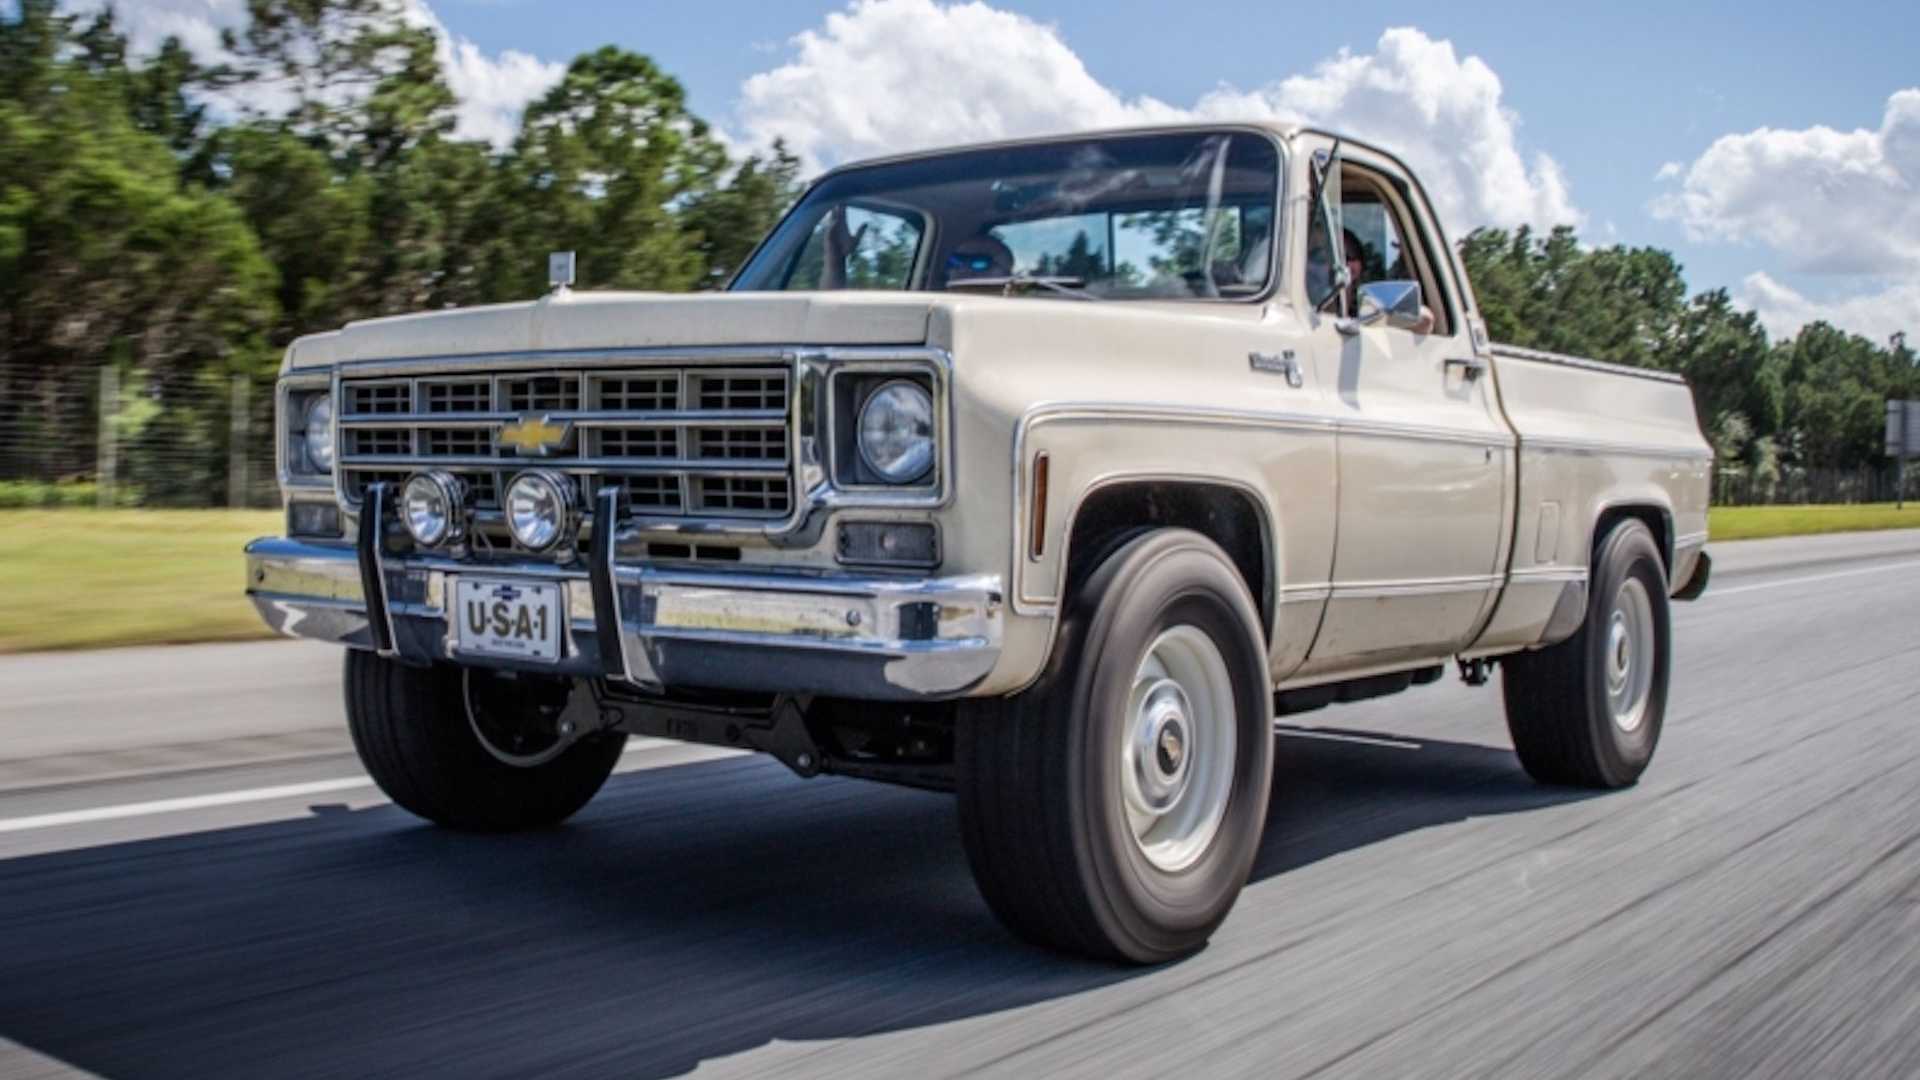 This 'New' Chevy Square Body Truck Takes Away The Pain Of Rebuild...